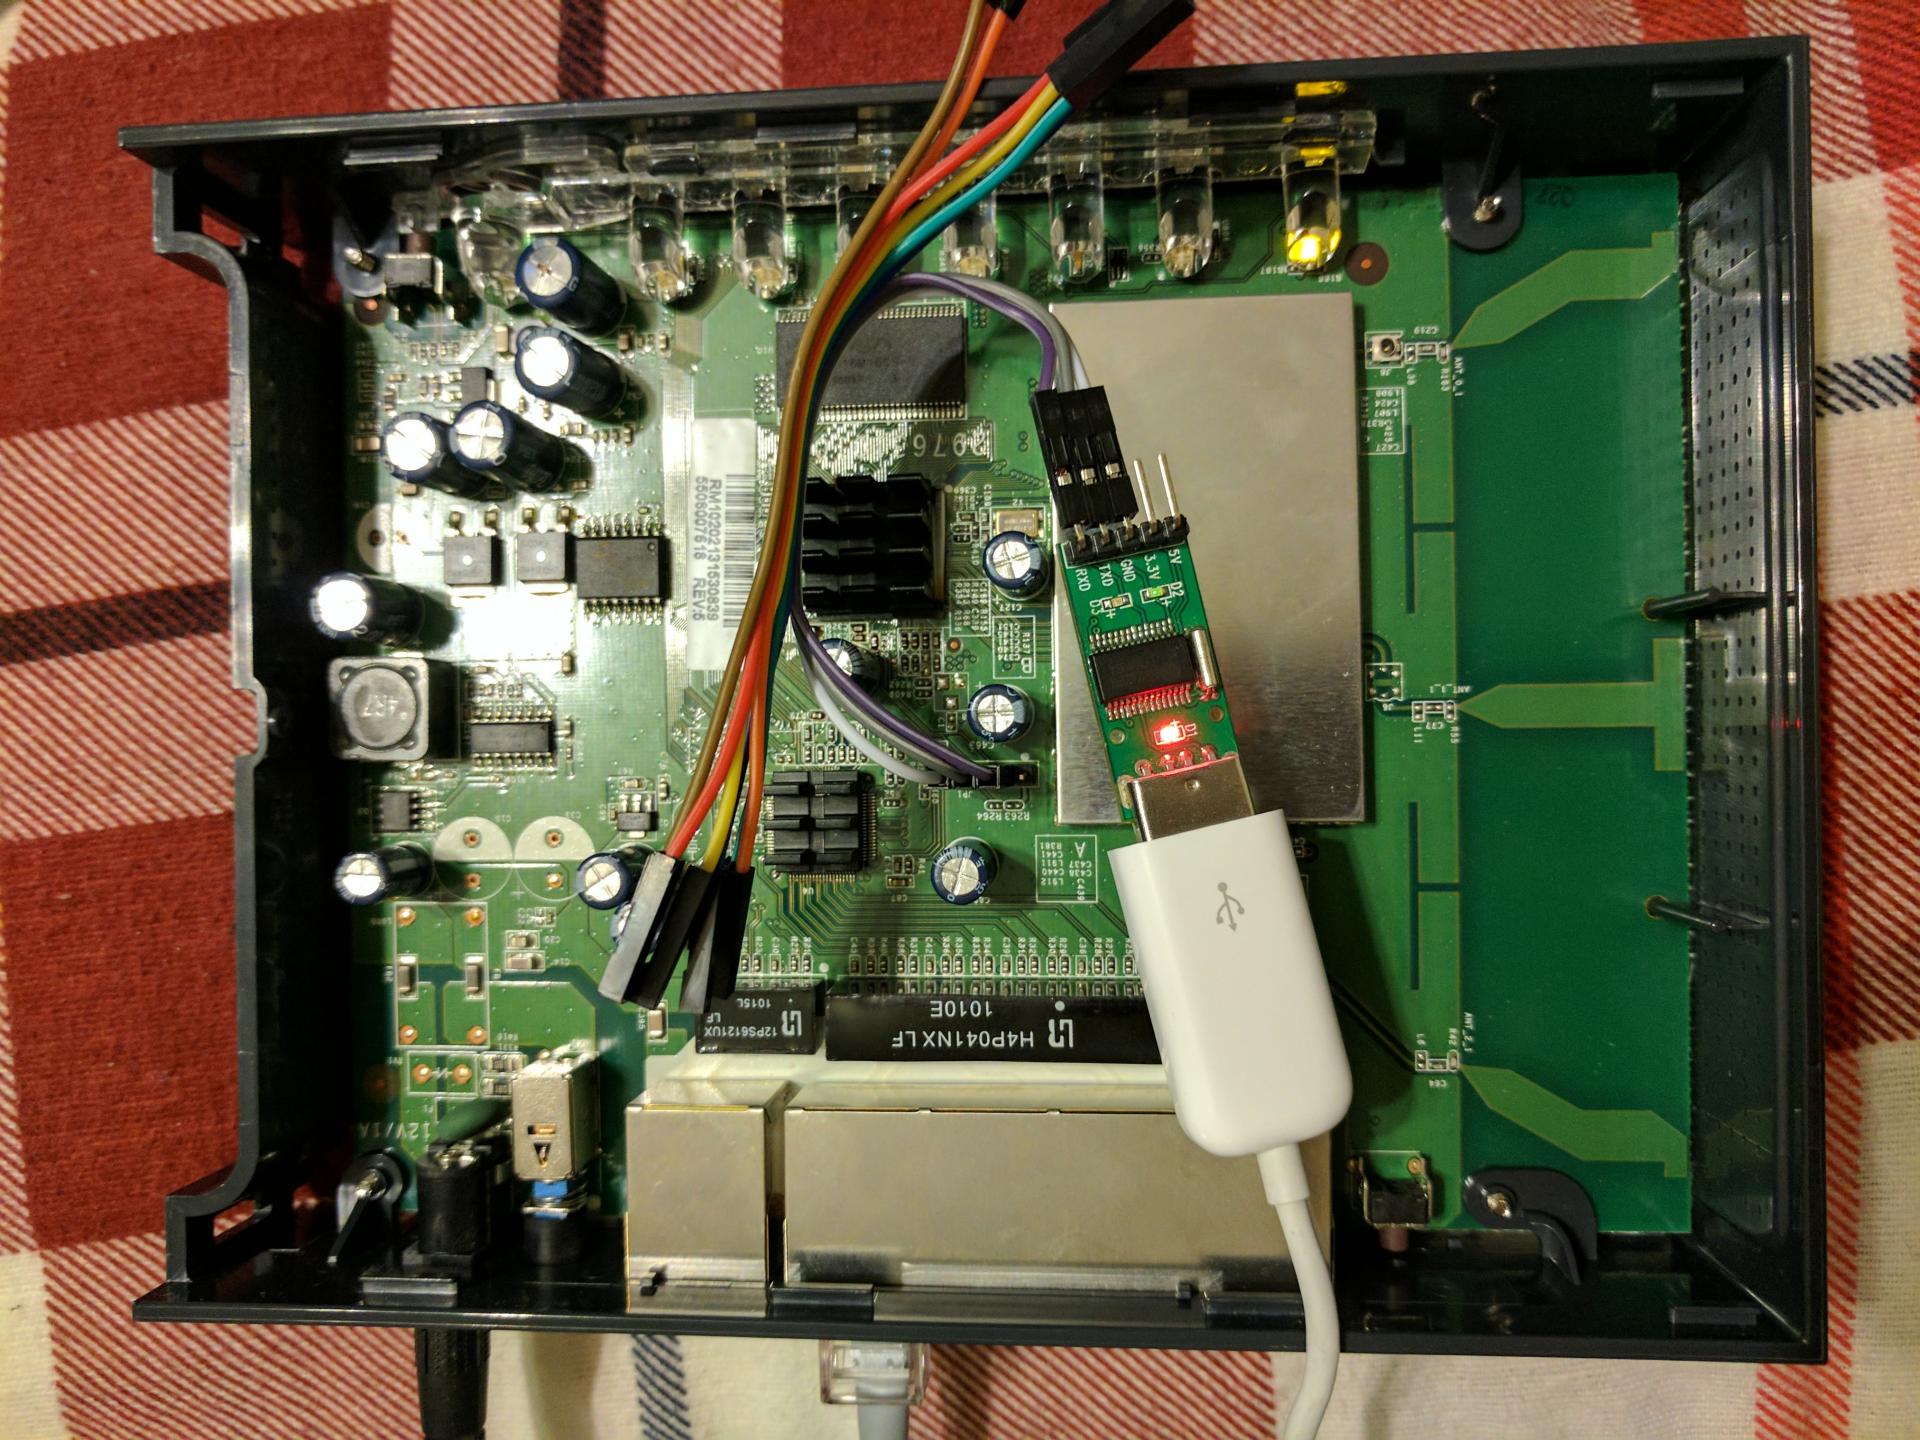 The WNR2000v1 board with TTL cables hooked up